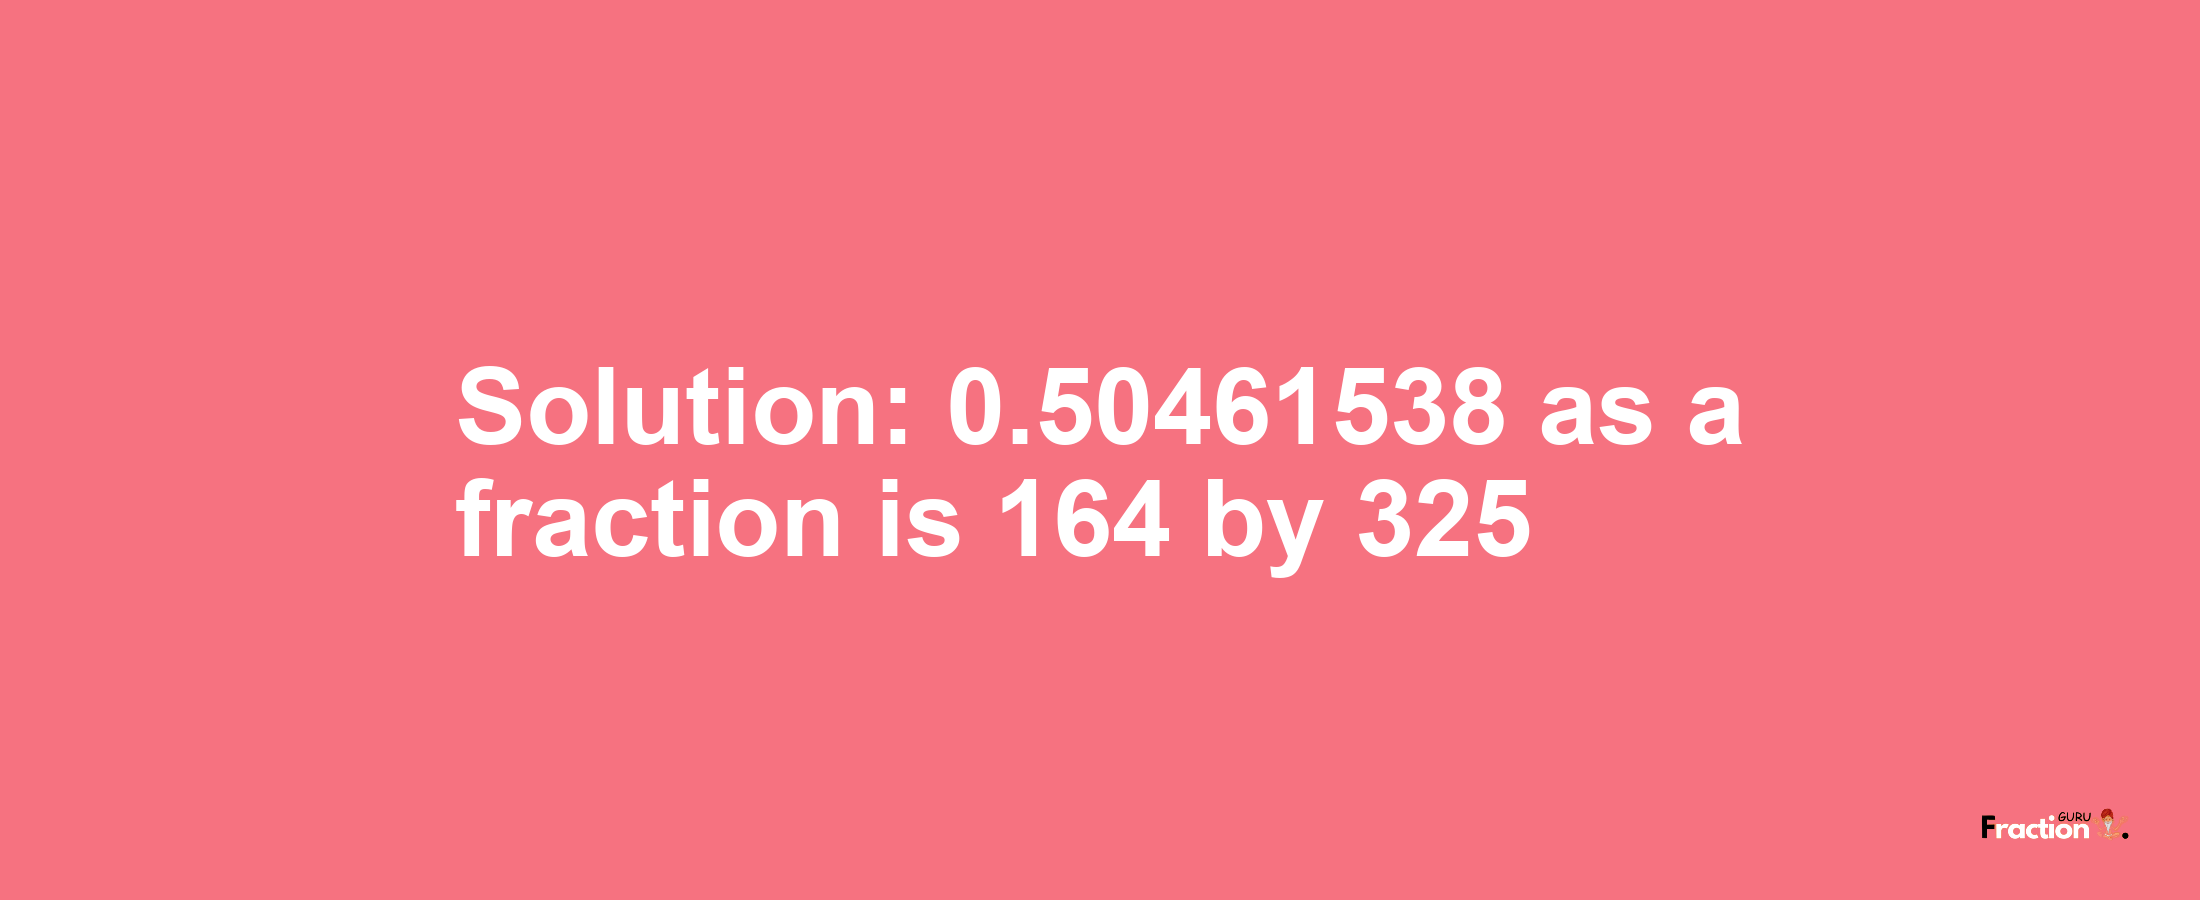 Solution:0.50461538 as a fraction is 164/325